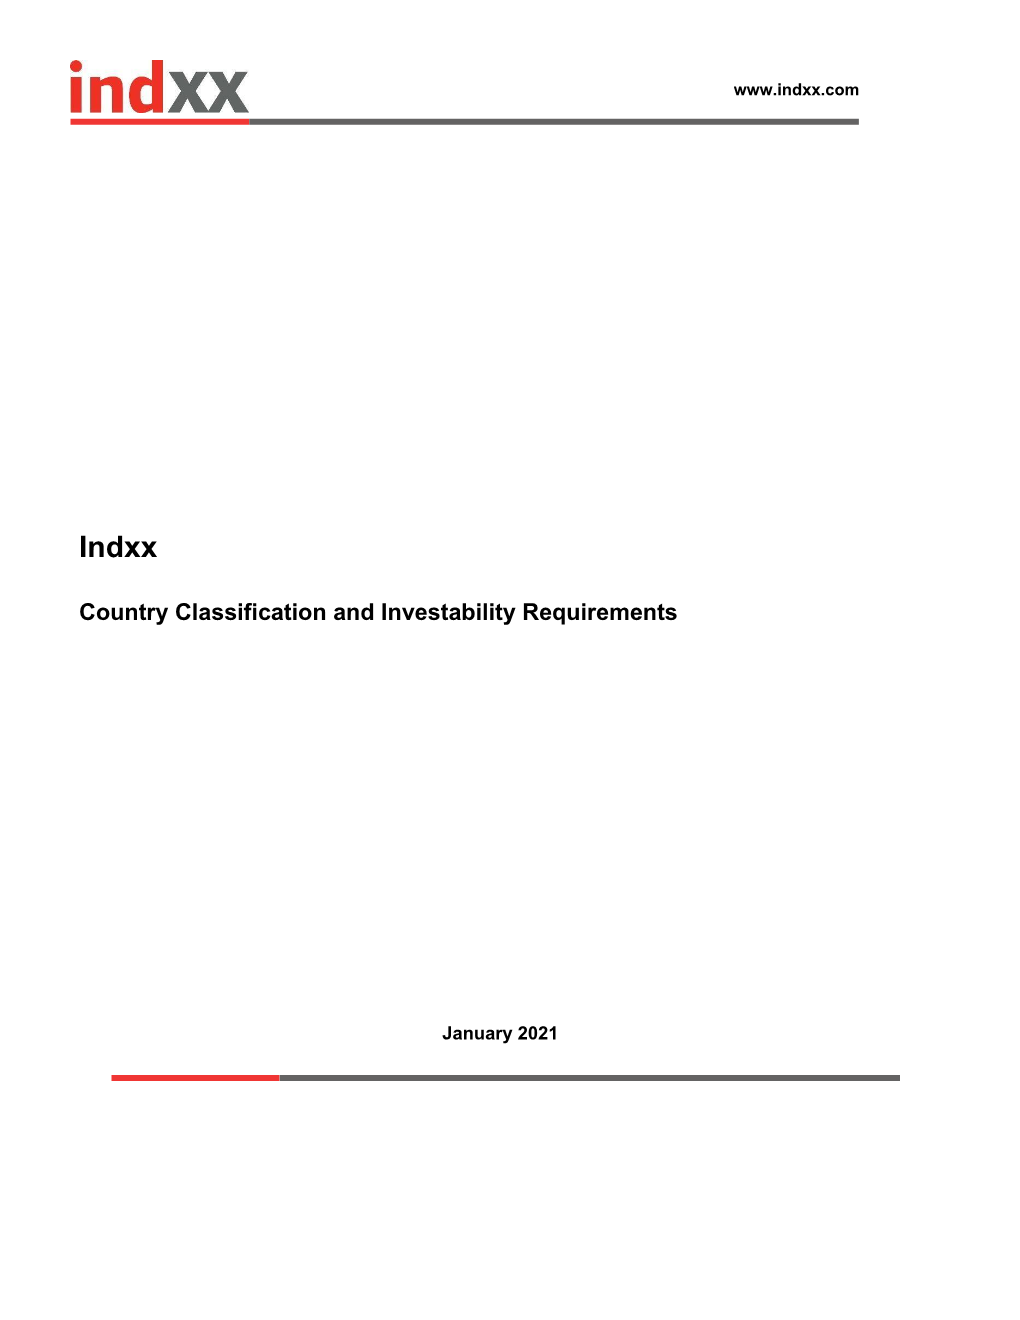 Country Classification and Investability Requirements